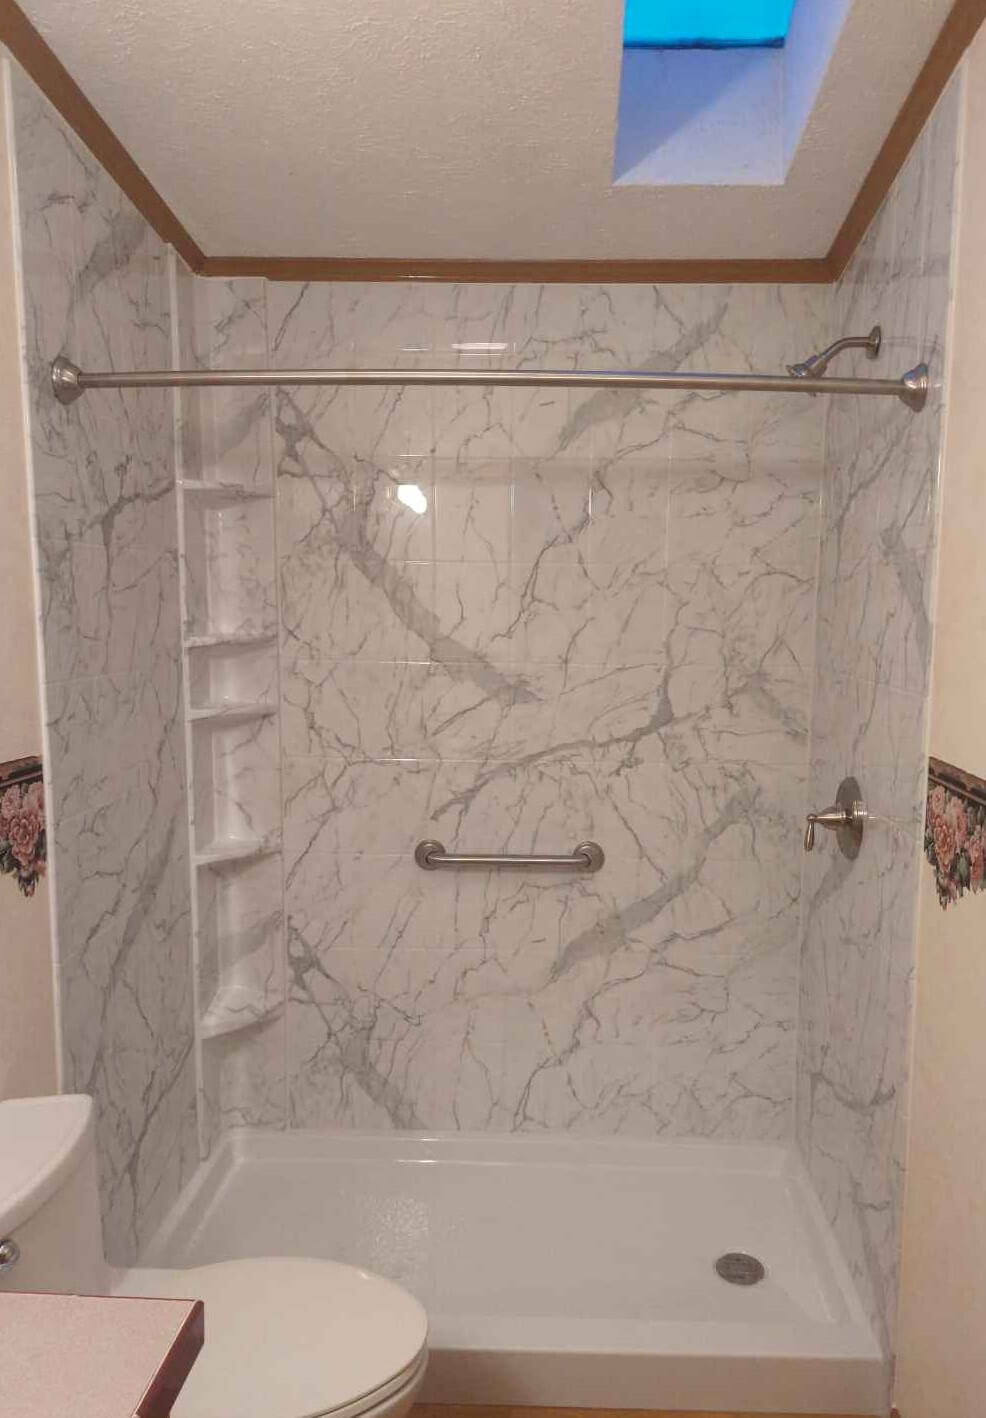 Walk-in shower with accessories and fixtures.